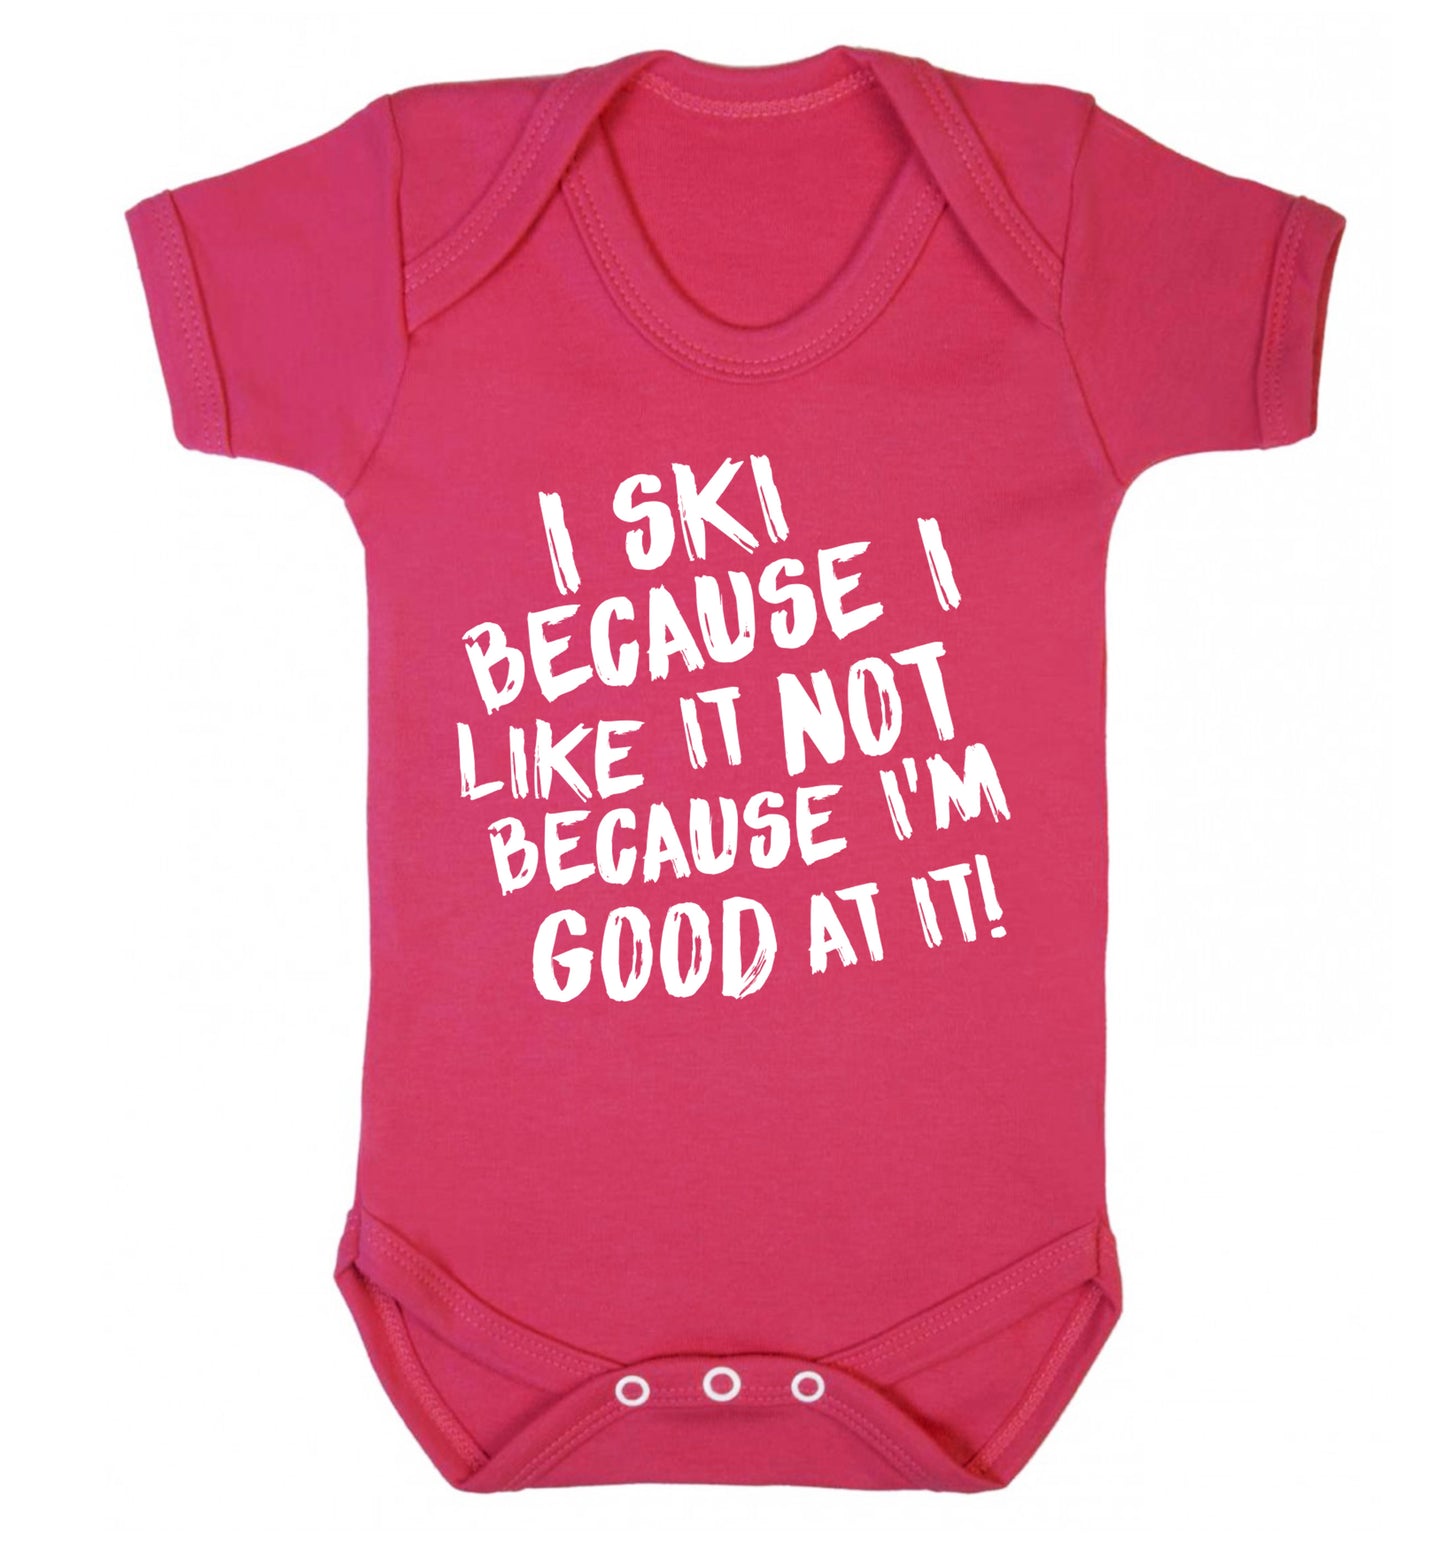 I ski because I like it not because I'm good at it Baby Vest dark pink 18-24 months